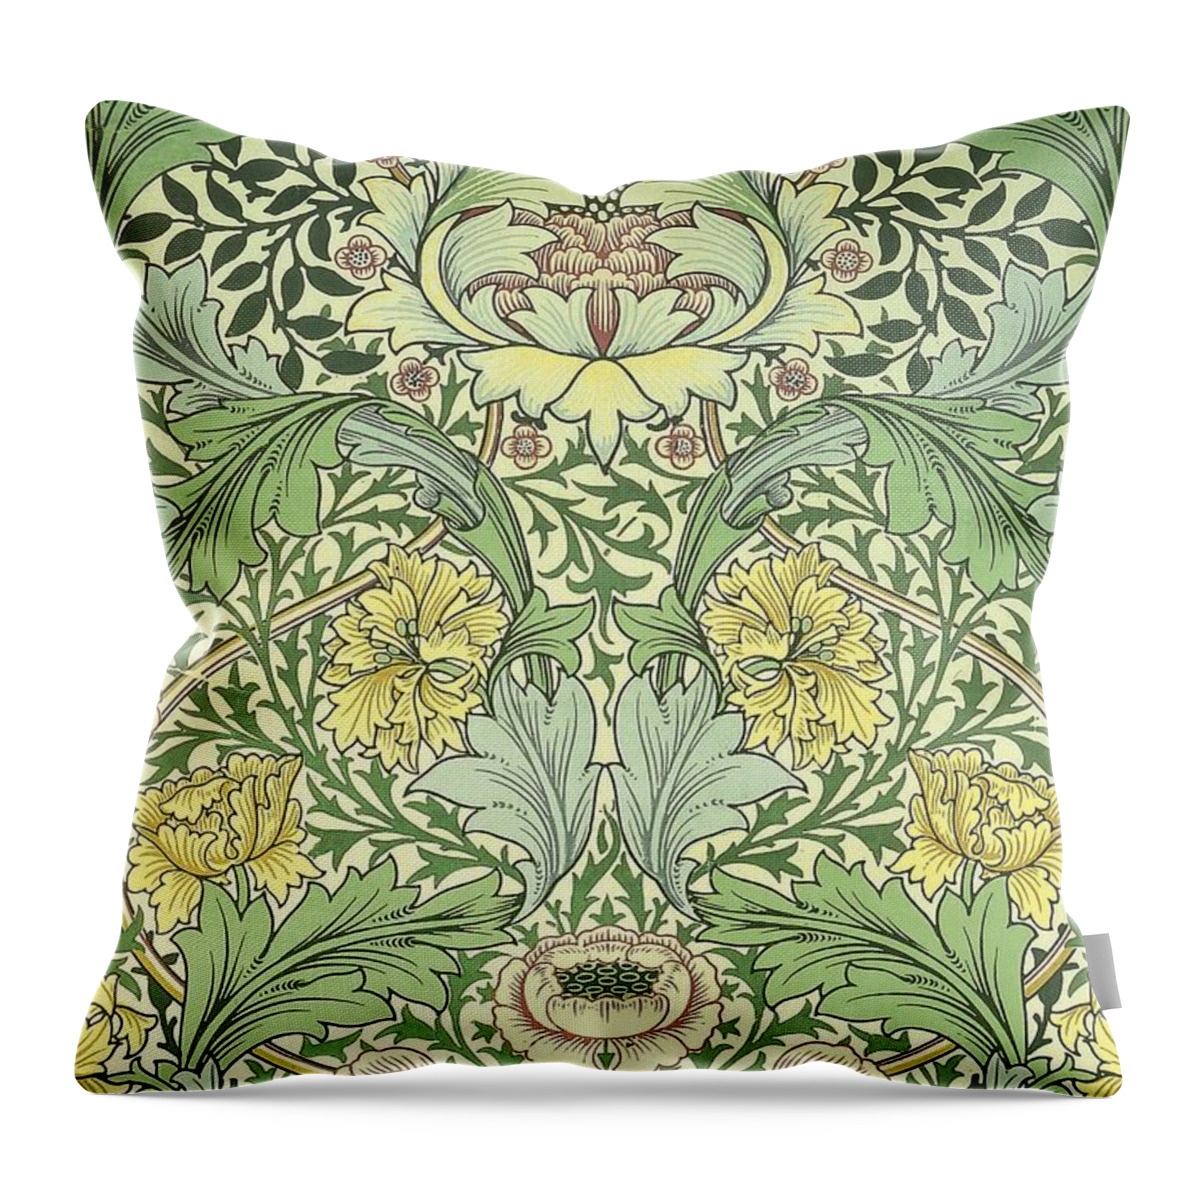 William Throw Pillow featuring the digital art Norwich Pattern by Philip Ralley